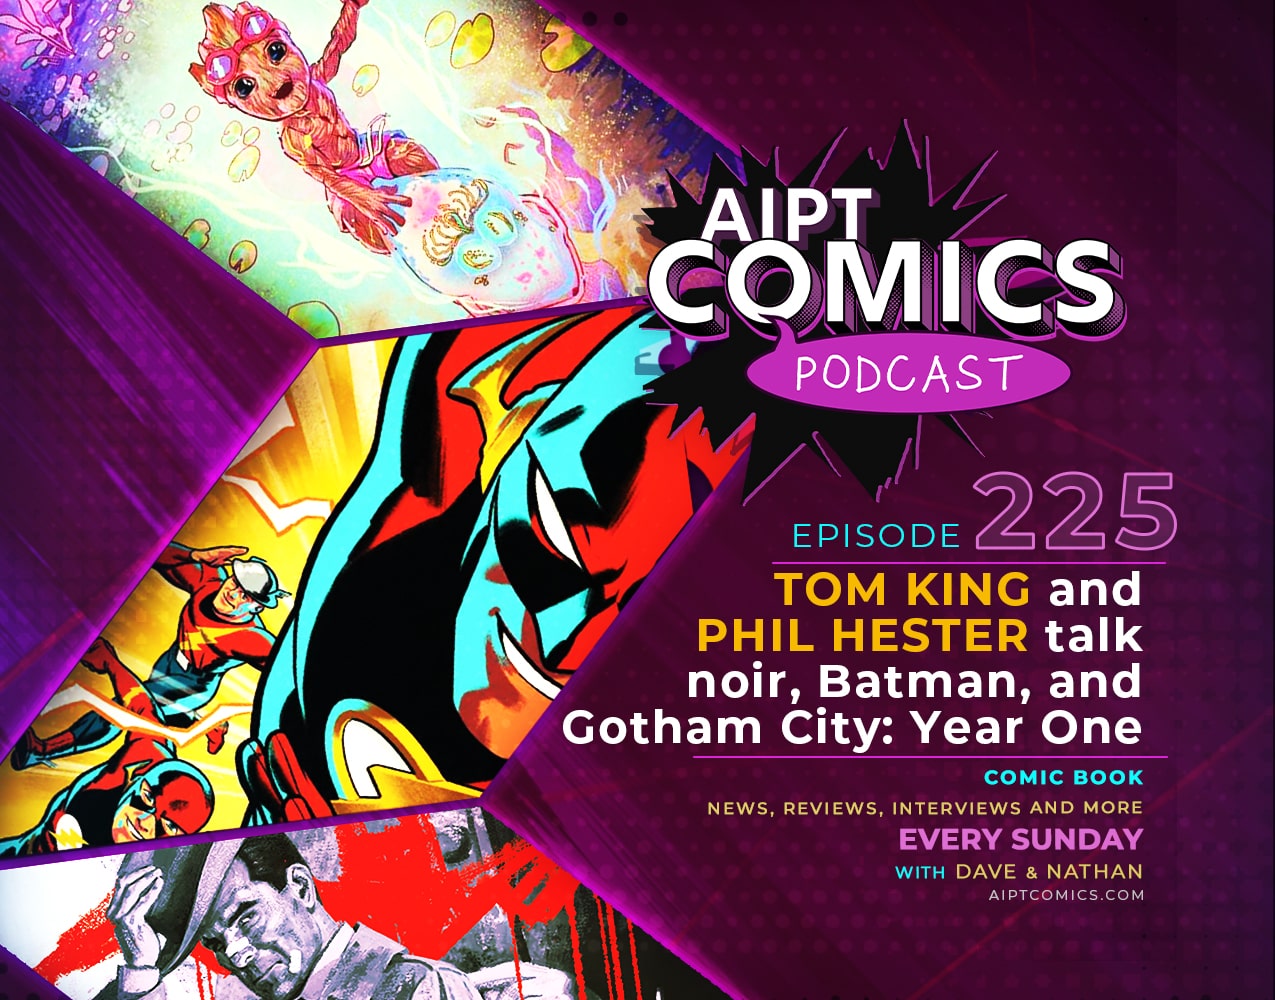 AIPT Comics Podcast episode 225: Tom King and Phil Hester talk Batman, Gotham City: Year One, and noir